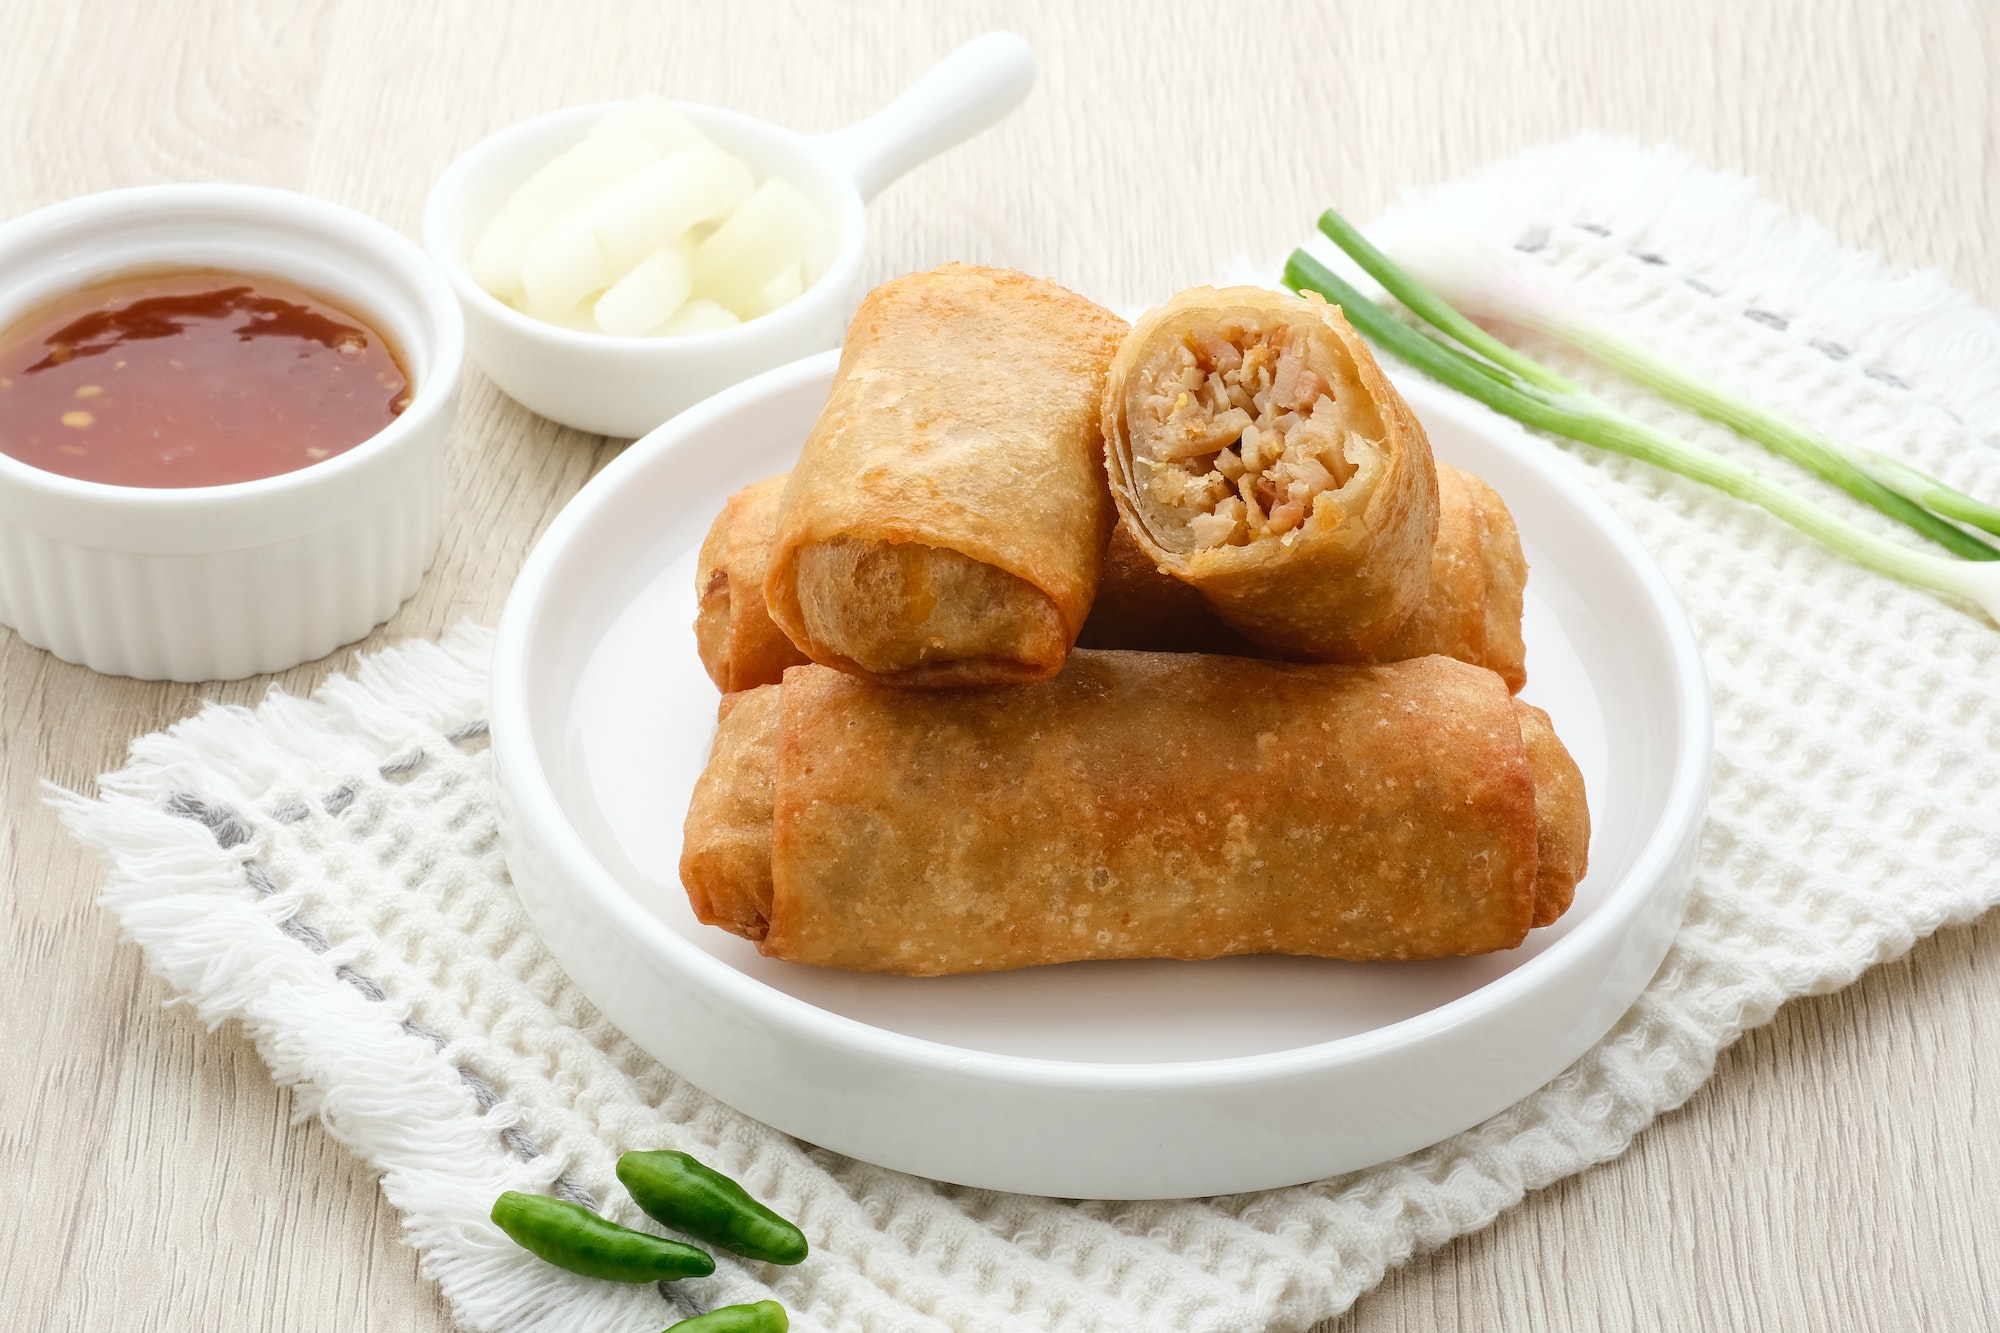 Lumpia or lunpia, traditional snacks from Semarang, Central Java, Indonesia.